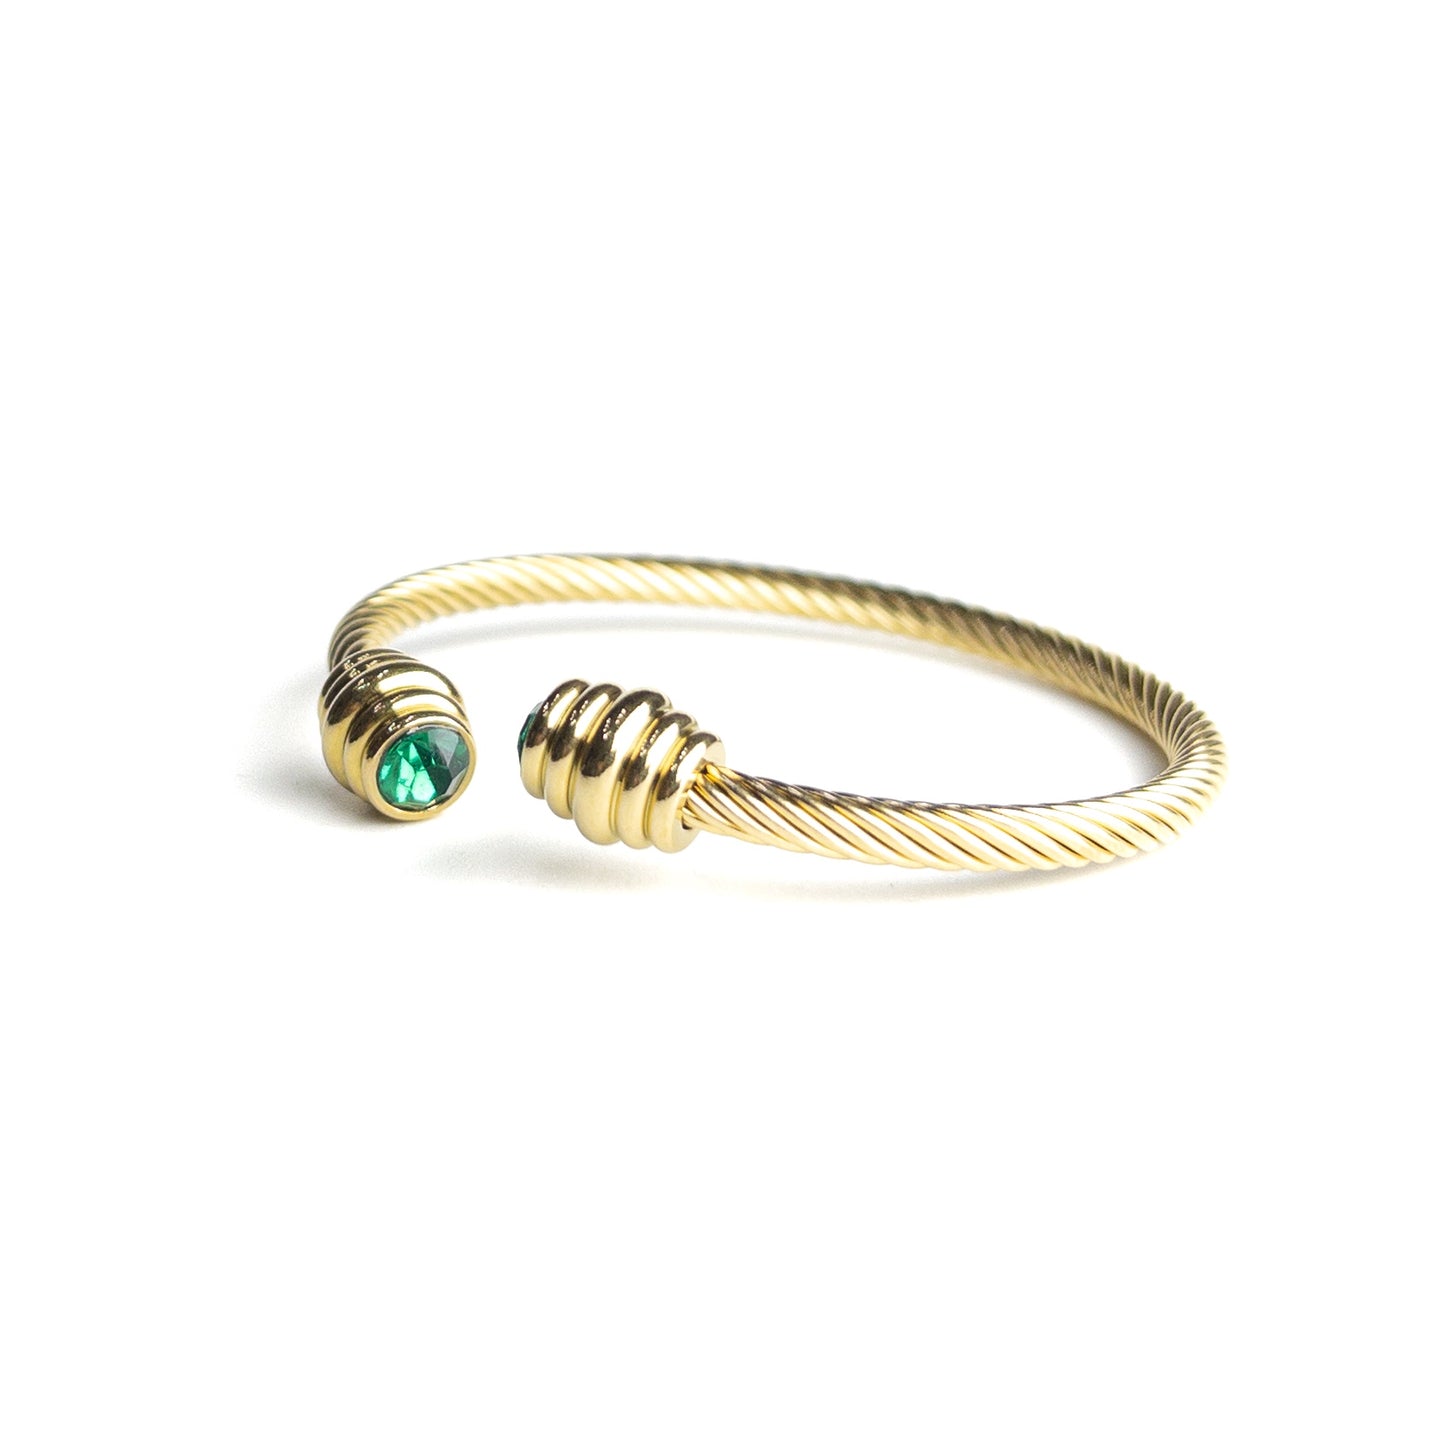 The Green Twisted bangle